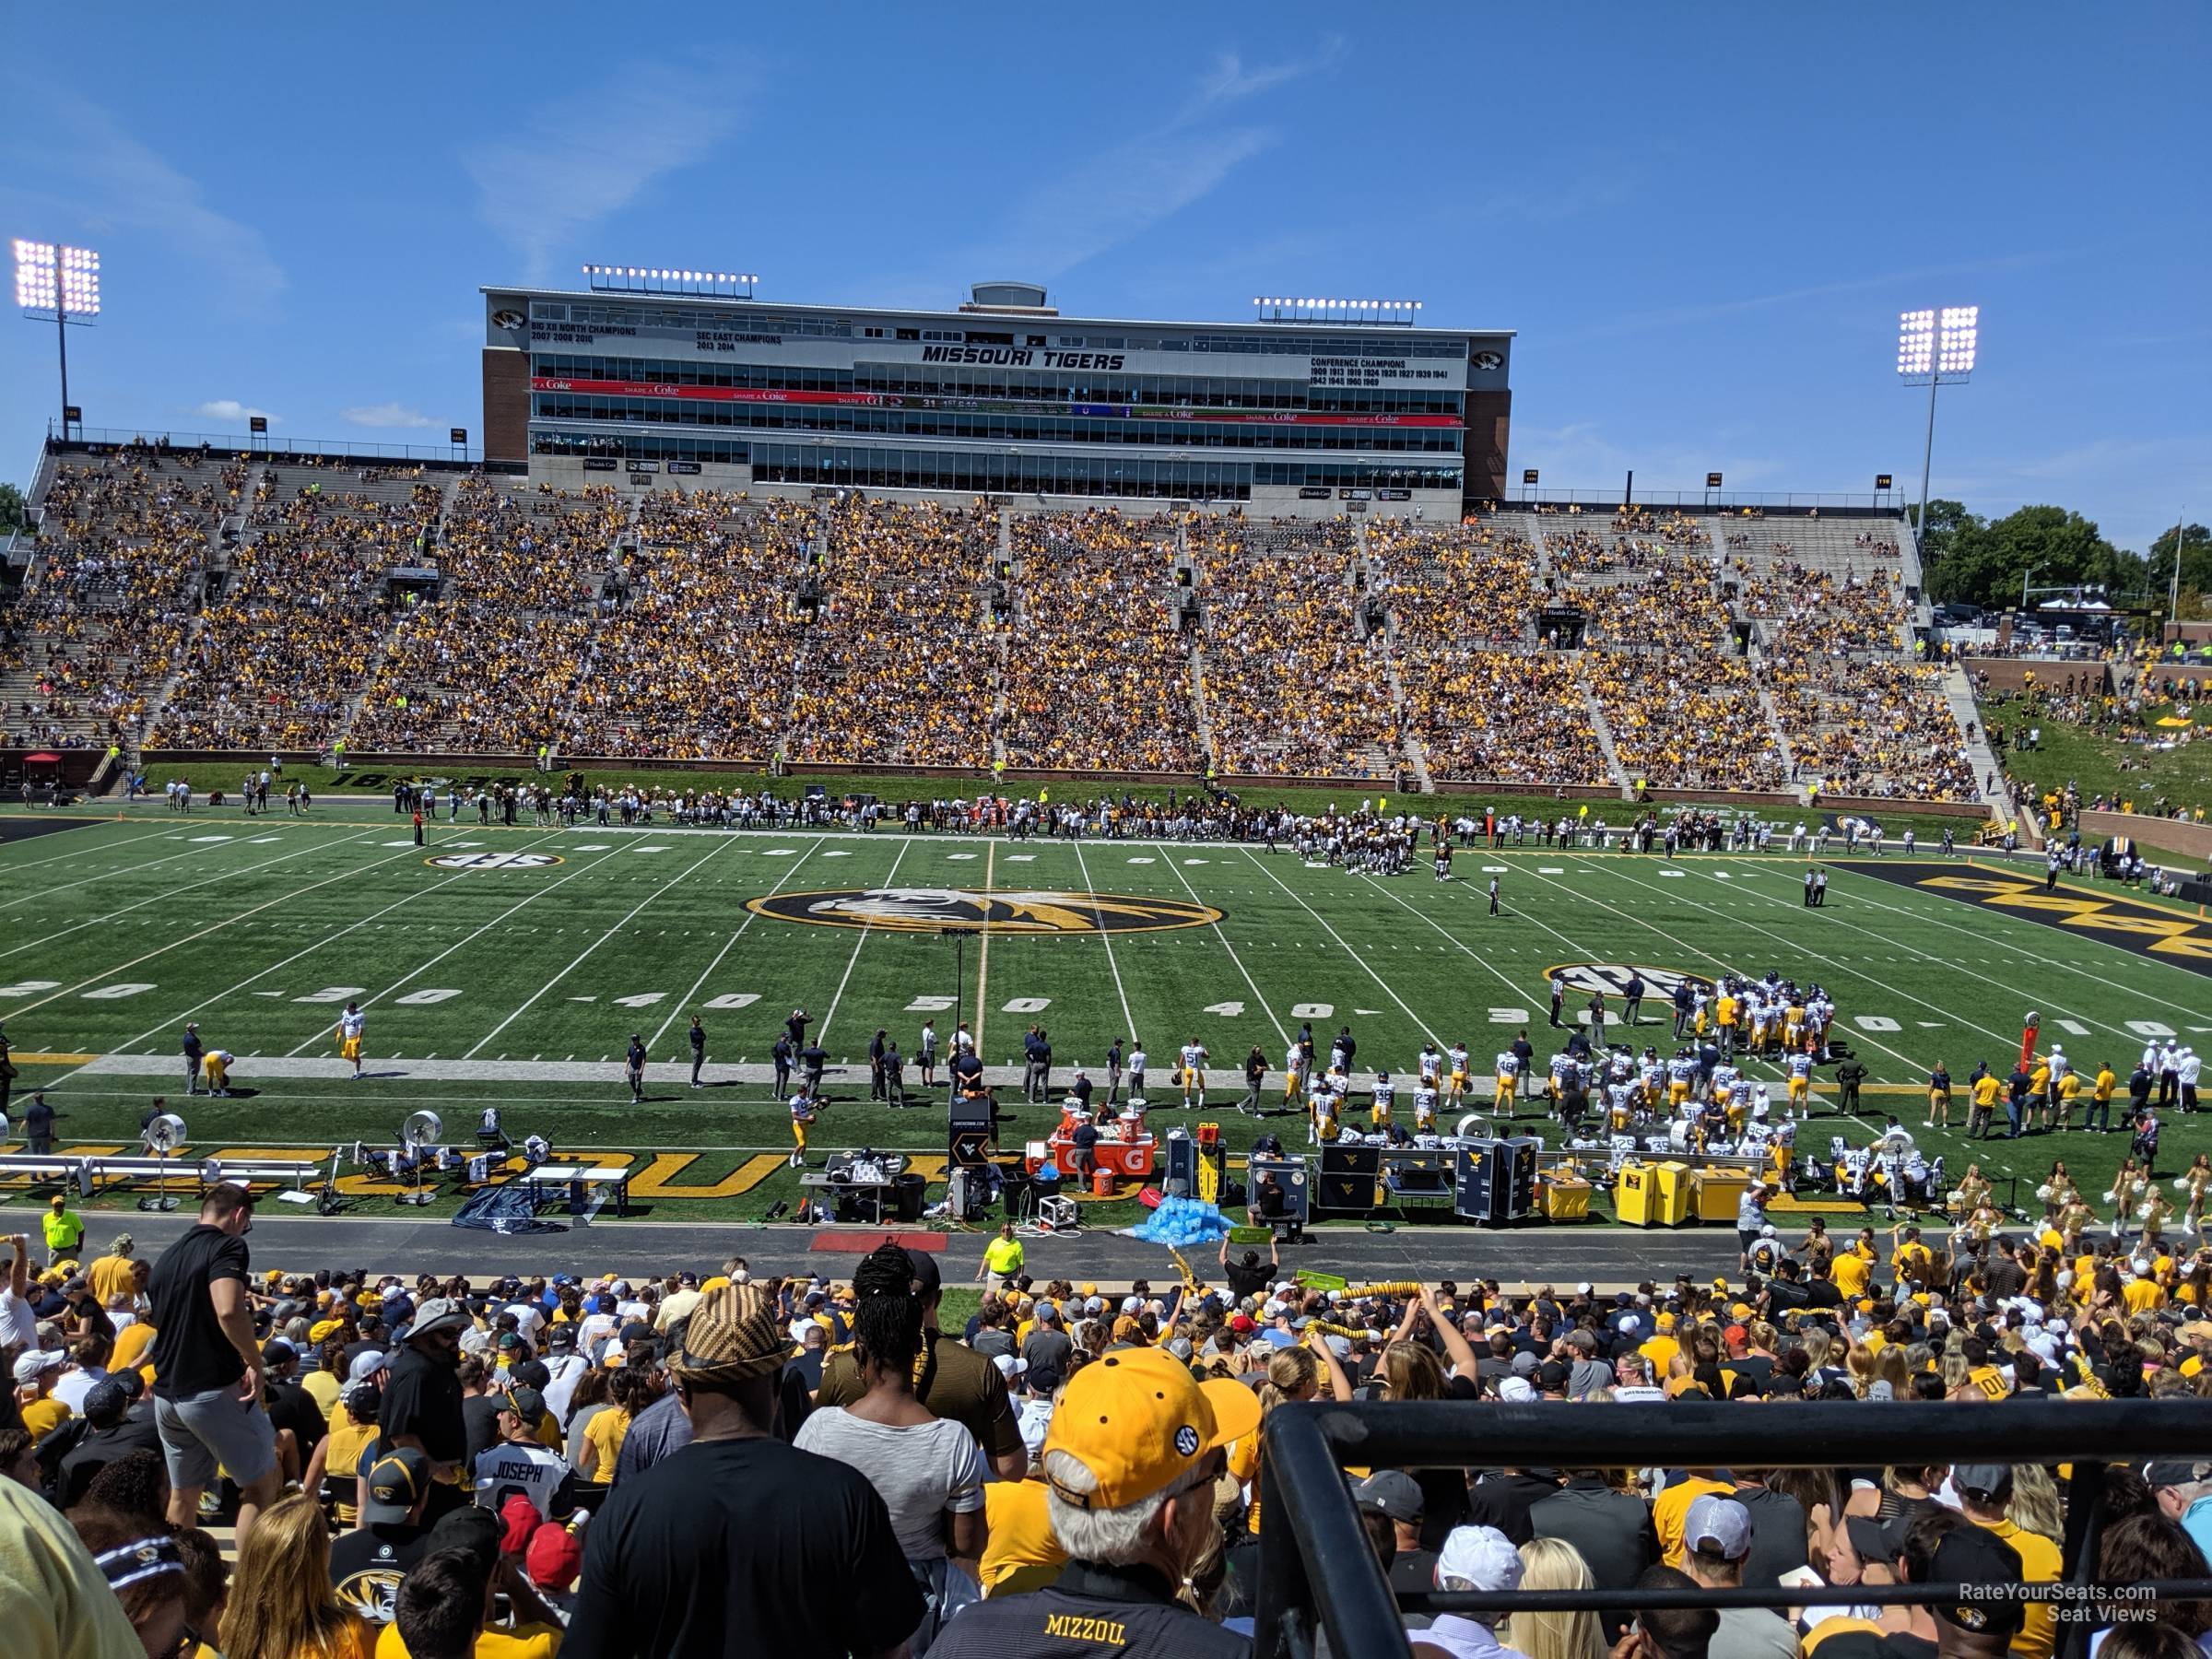 section 106, row 38 seat view  - faurot field